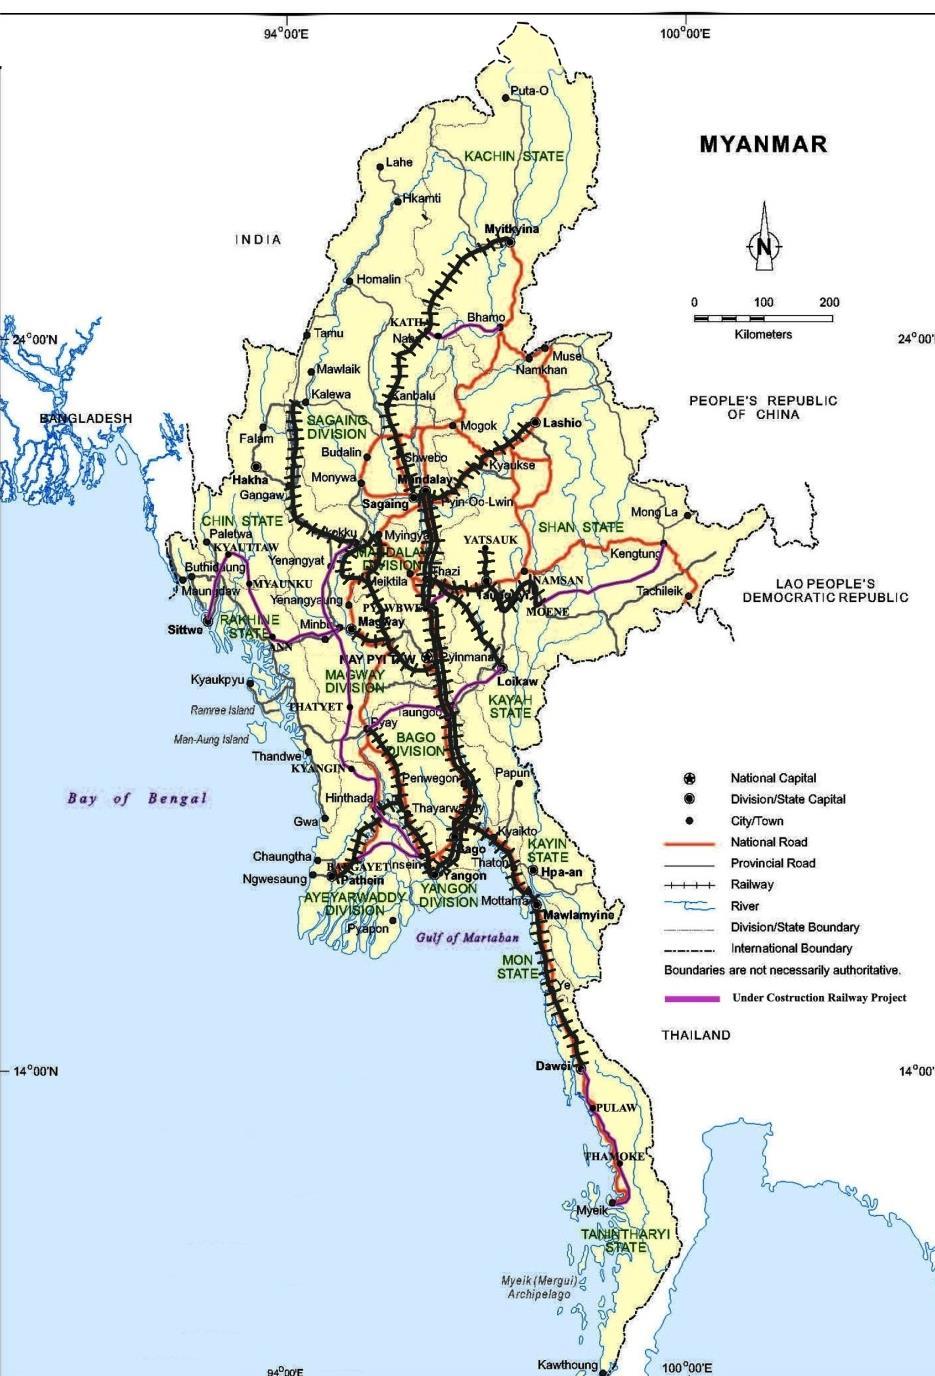 FACTS Of MYANMA RAILWAYS Kalay MyitKyina Lashio Mandalay Pyay Yangon Dawei Myanma Railways Network as 31 th May 2017 Started in 1877 (140 year old) Divided into 11 divisions Employment strength 20018